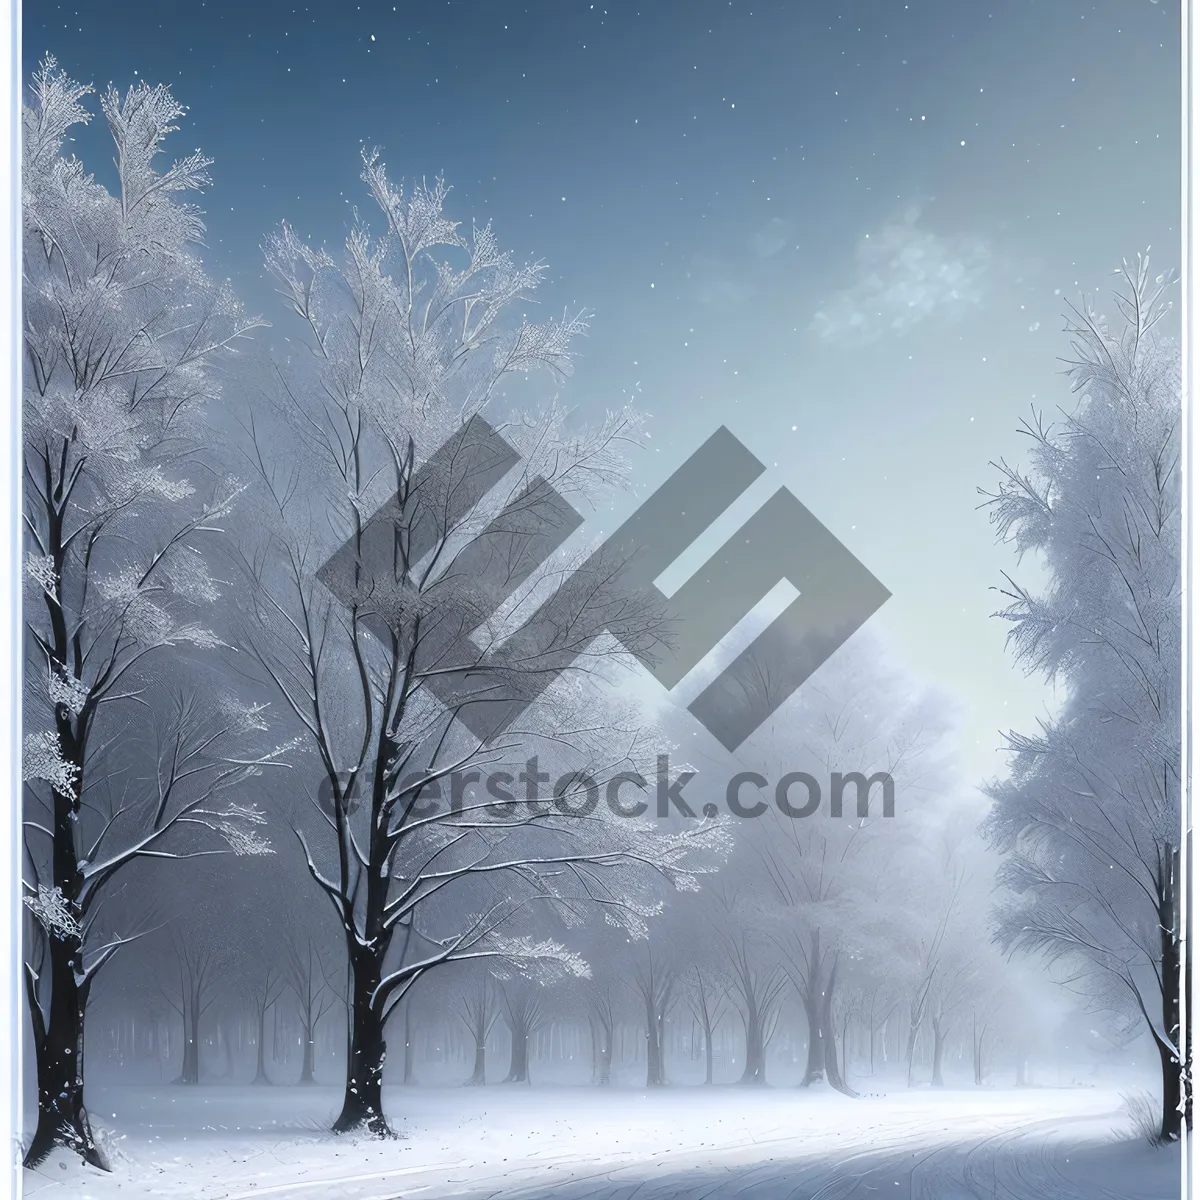 Picture of Winter Wonderland: Snowy Landscape with Frost-Covered Trees